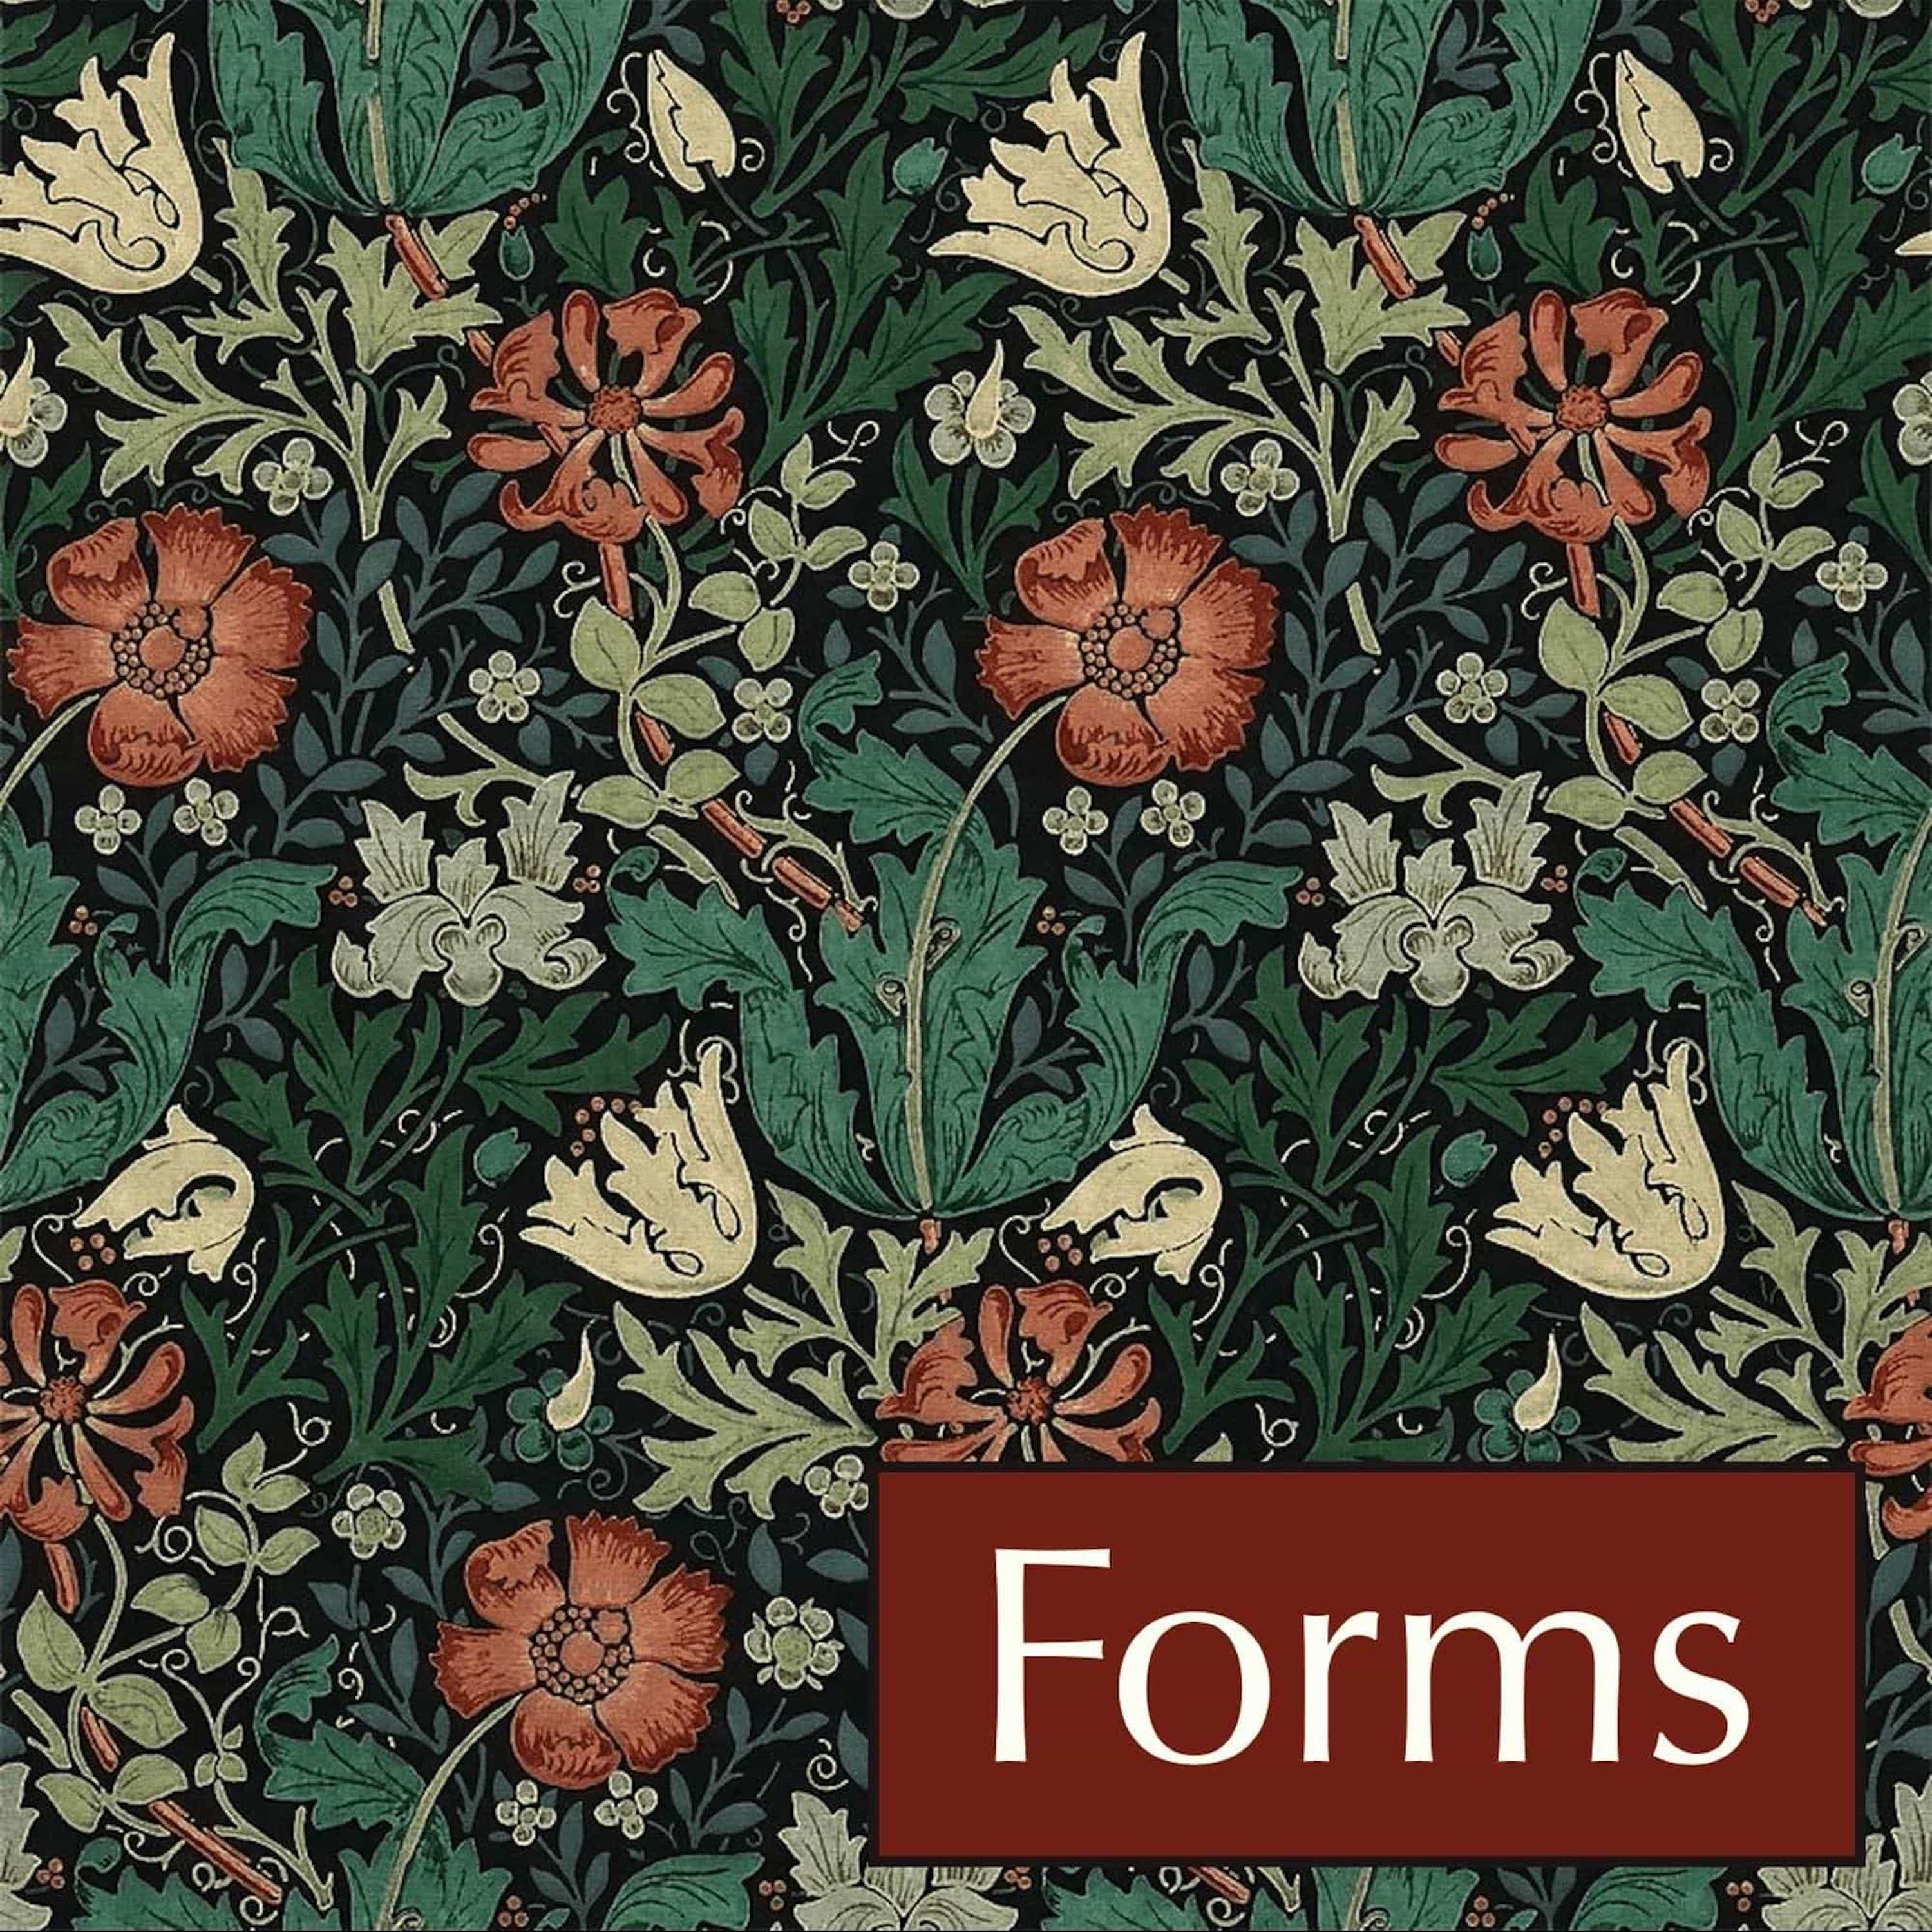 Forms Podcast cover art featuring a fine floral pattern by William Morris